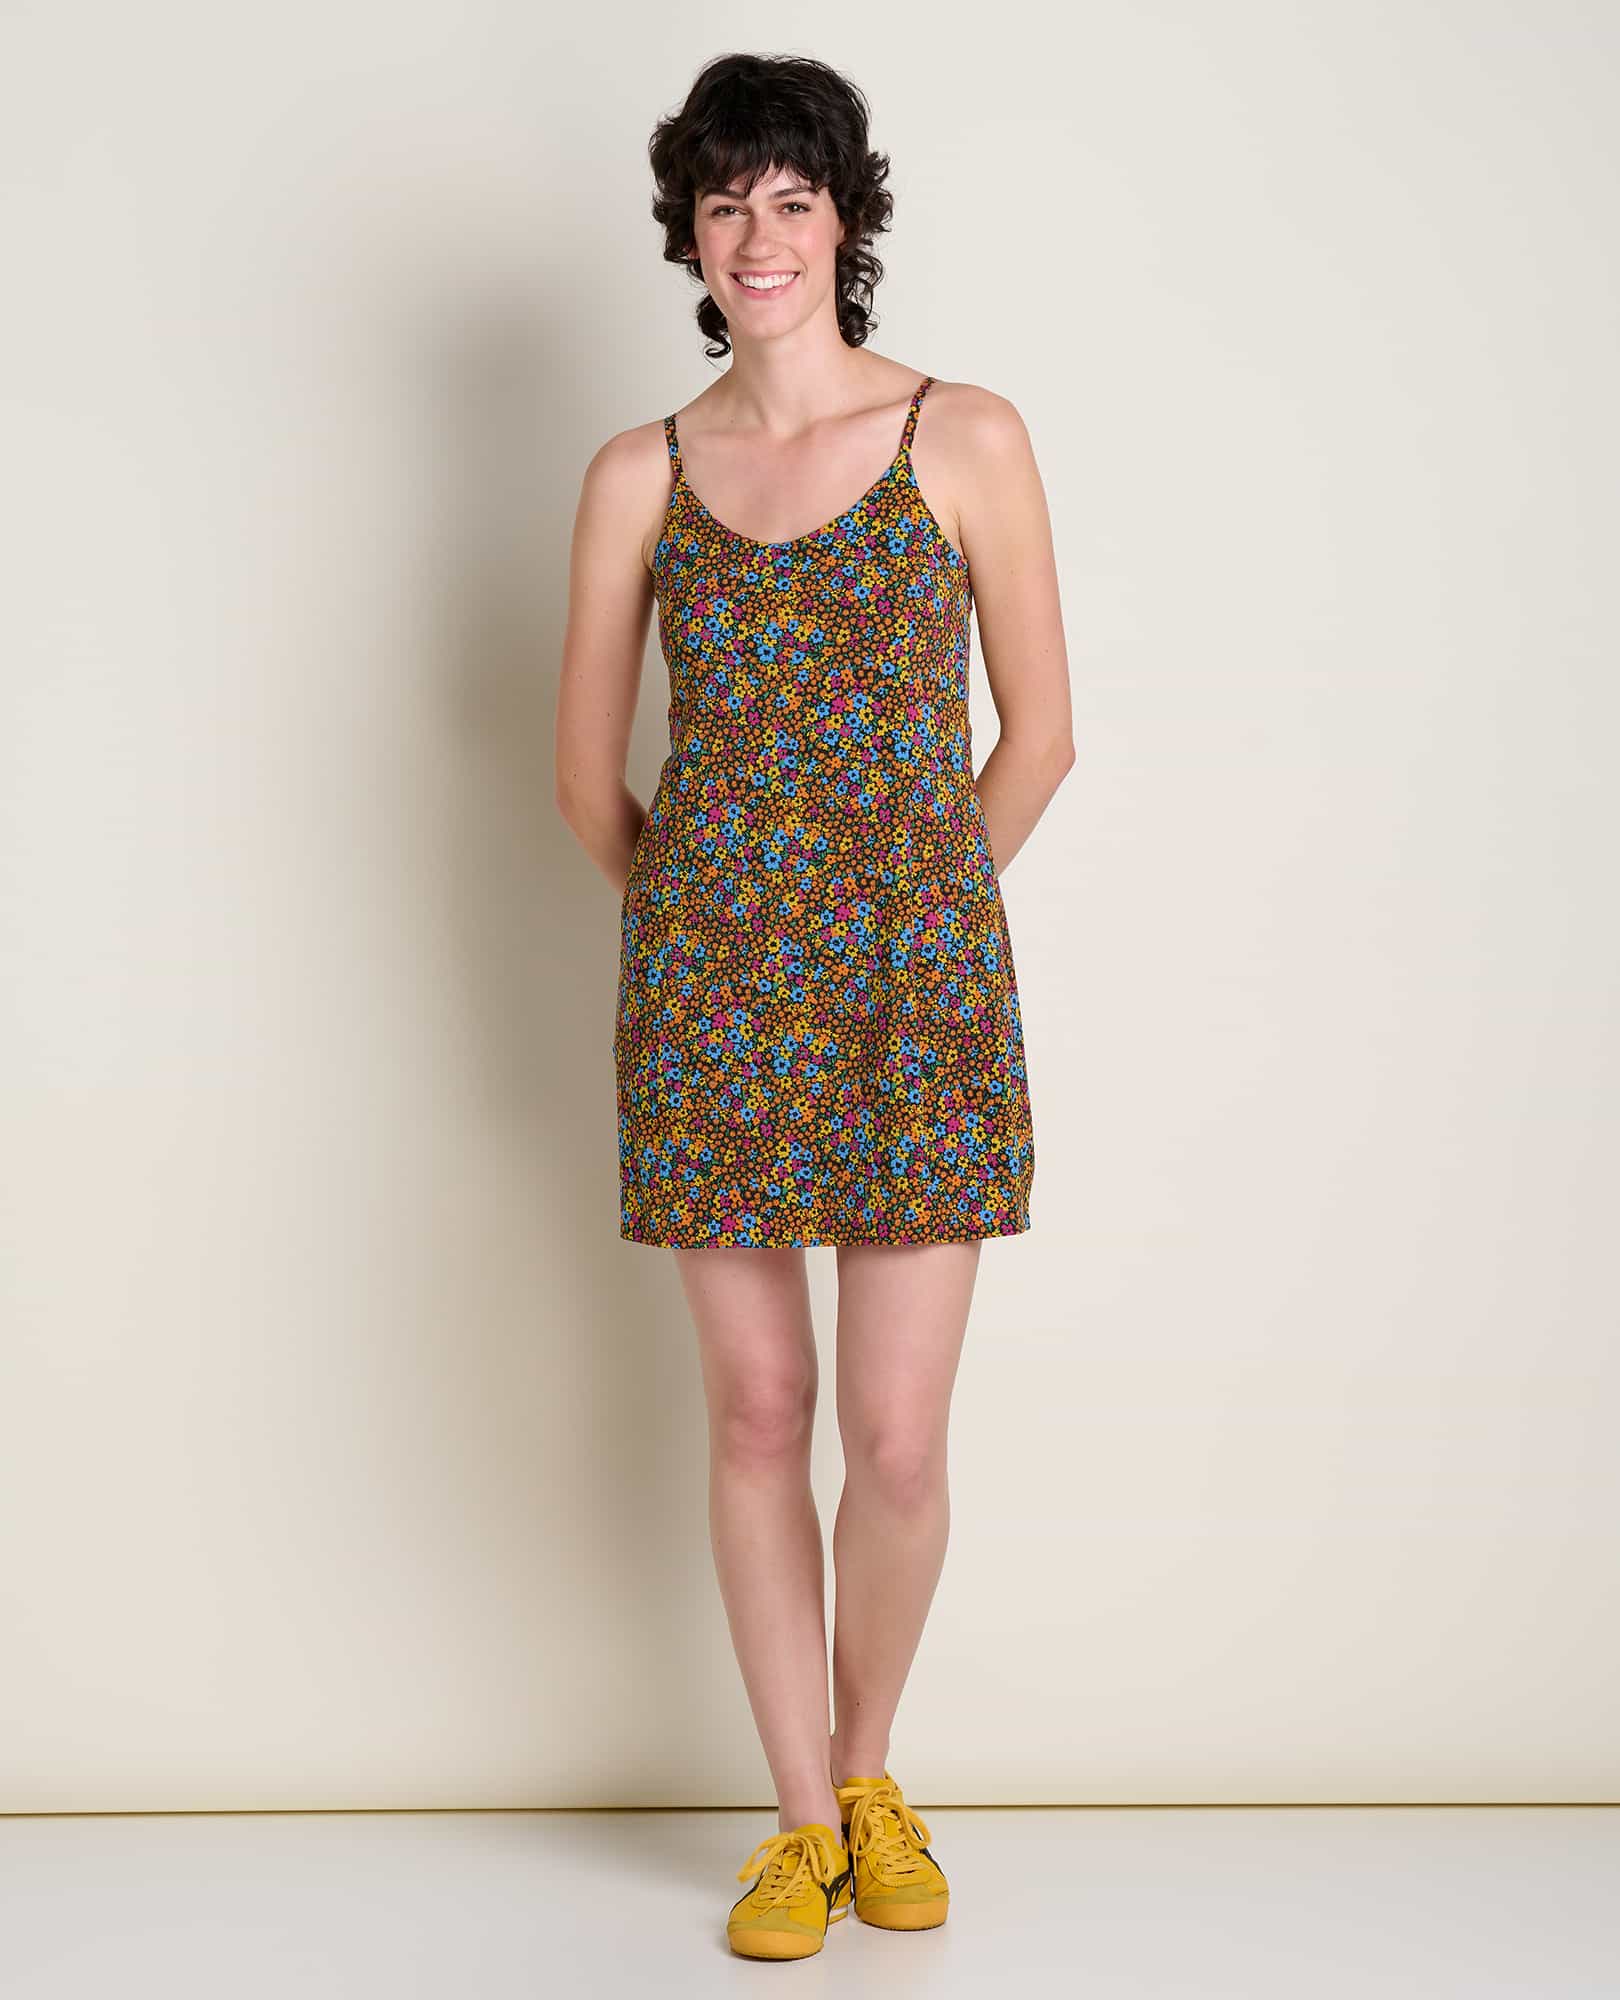 Sunkissed Skort Dress  Exercise and Travel Dress by Toad&Co